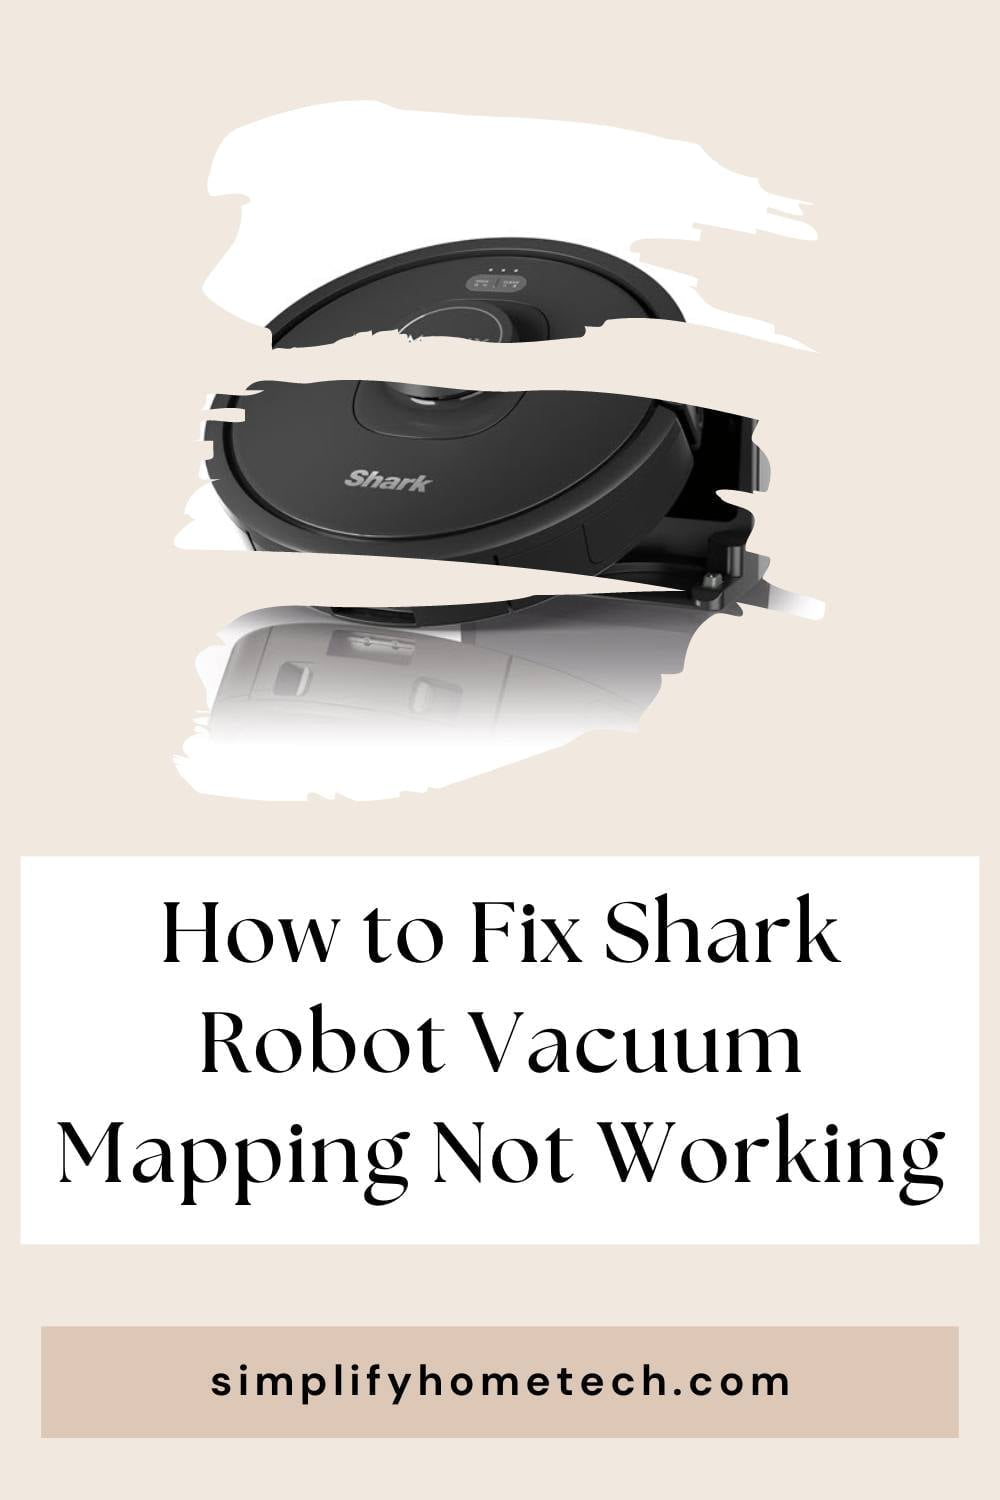 How to Fix Shark Robot Vacuum Mapping Not Working